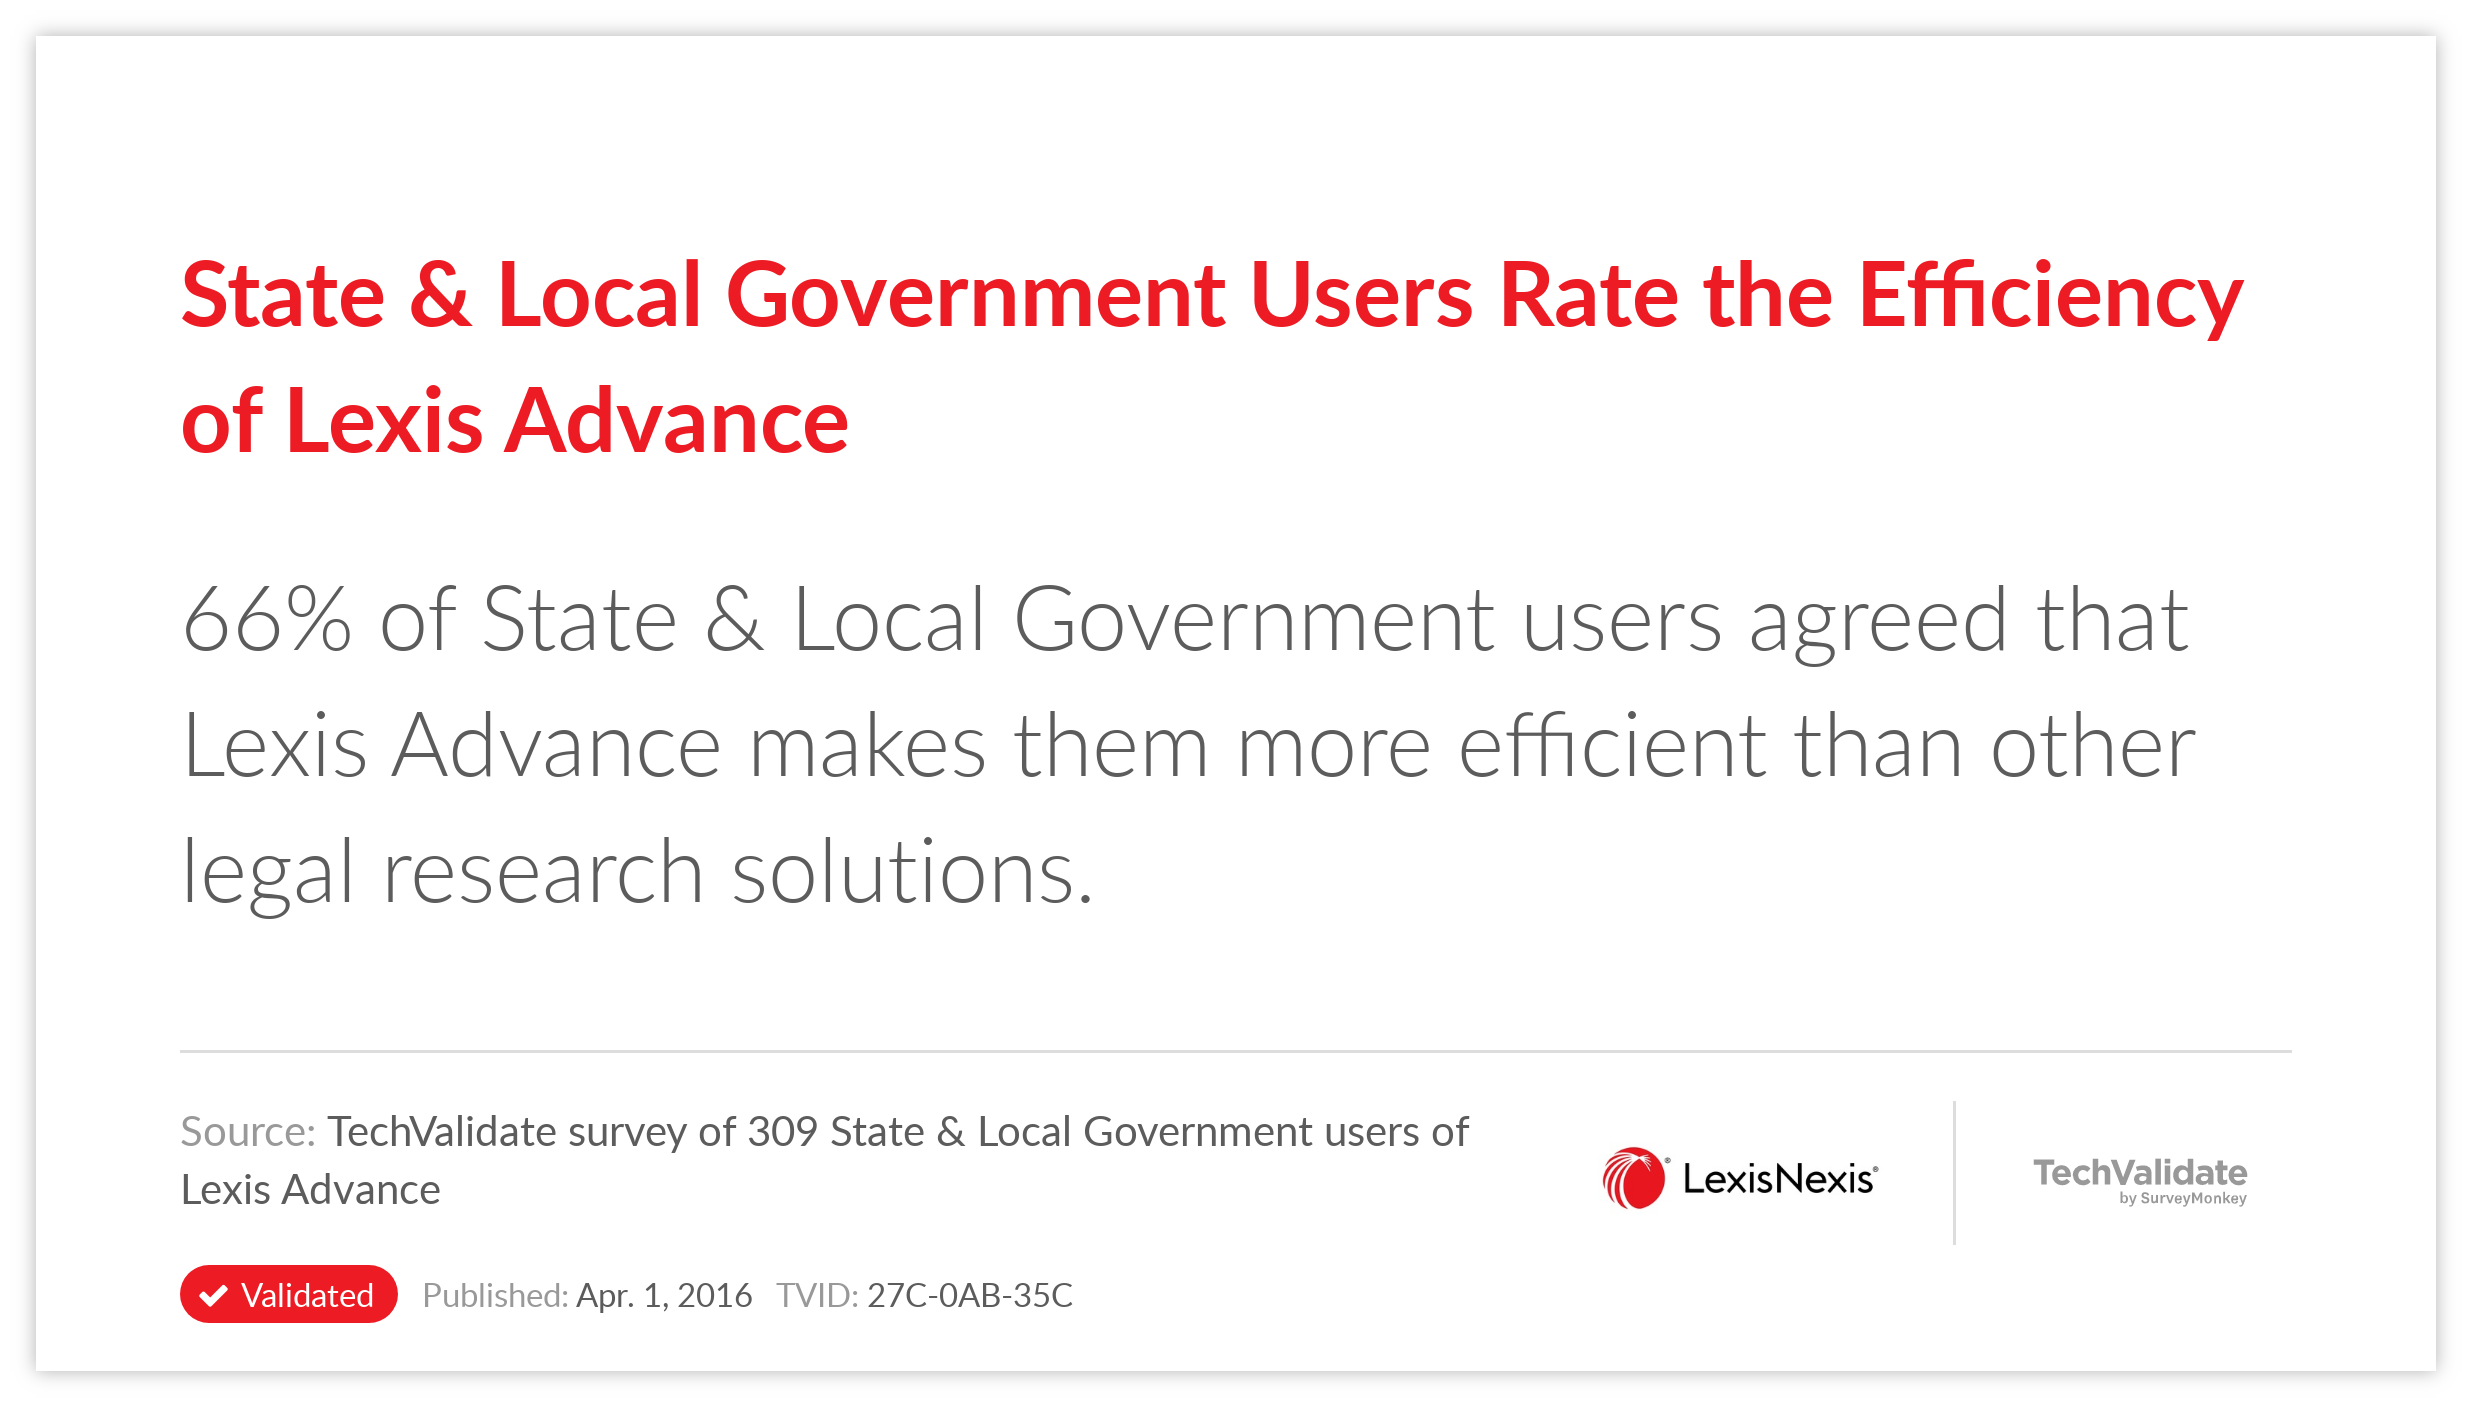 State & Local Government Users Rate the Efficiency of Lexis Advance